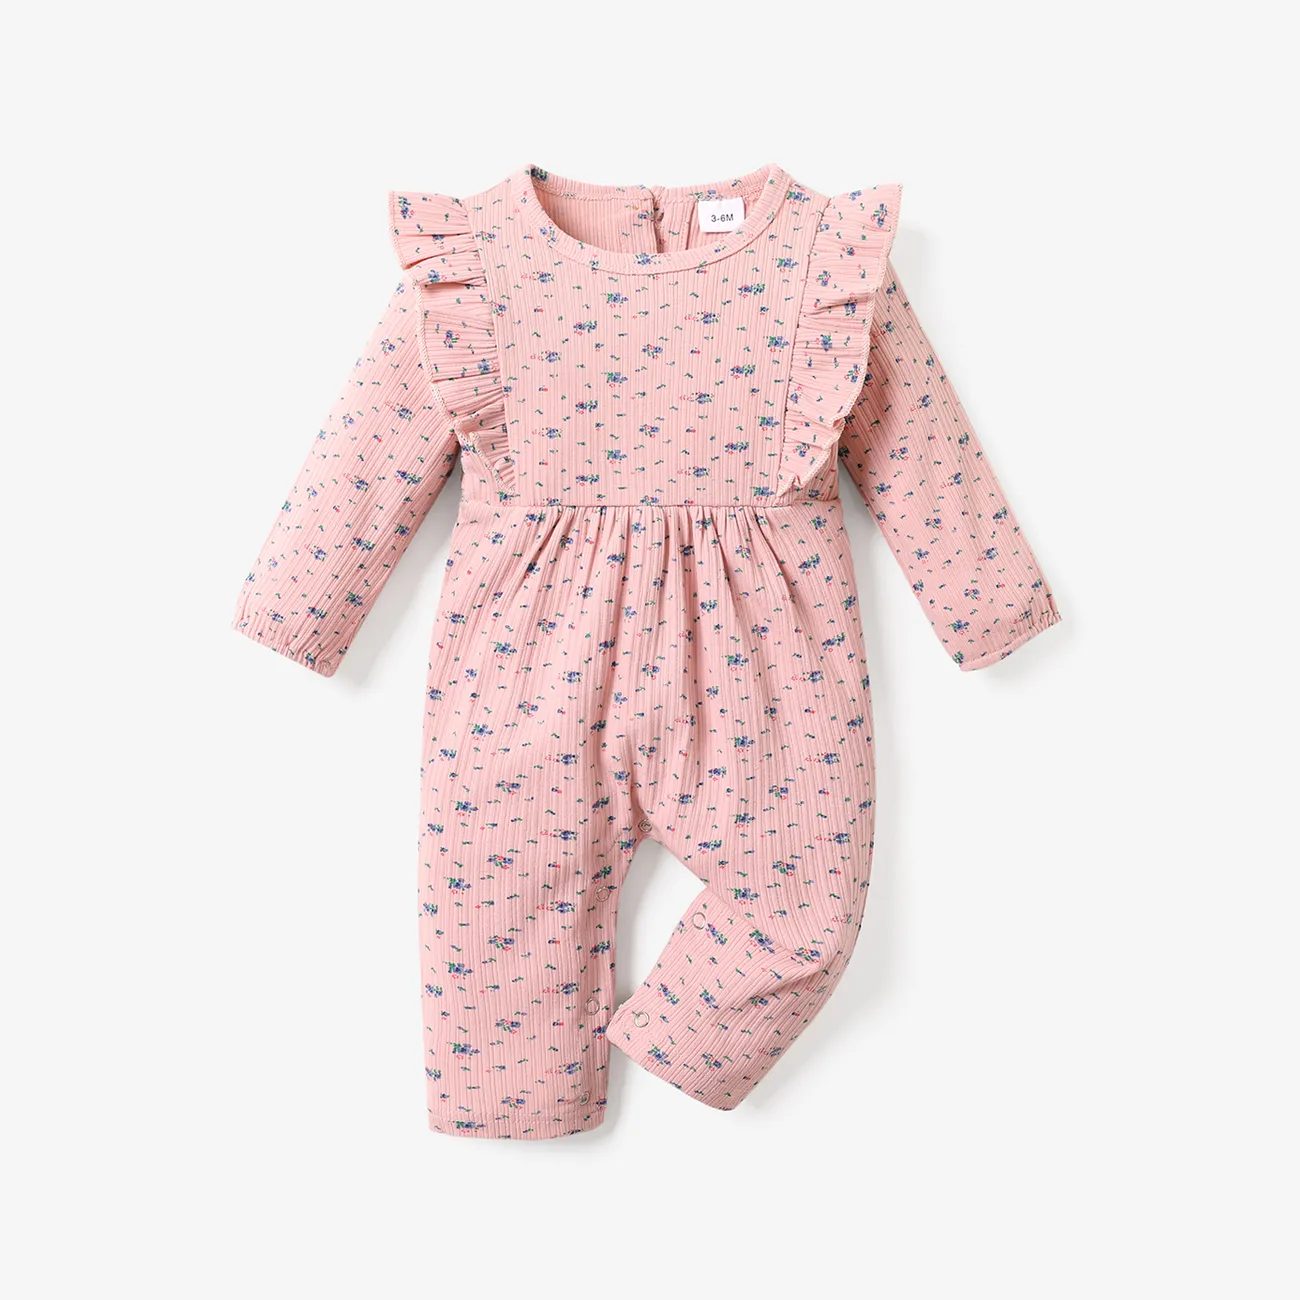 Ribbed Floral Allover Ruffle Decor Long-sleeve Baby Jumpsuit Pink big image 1